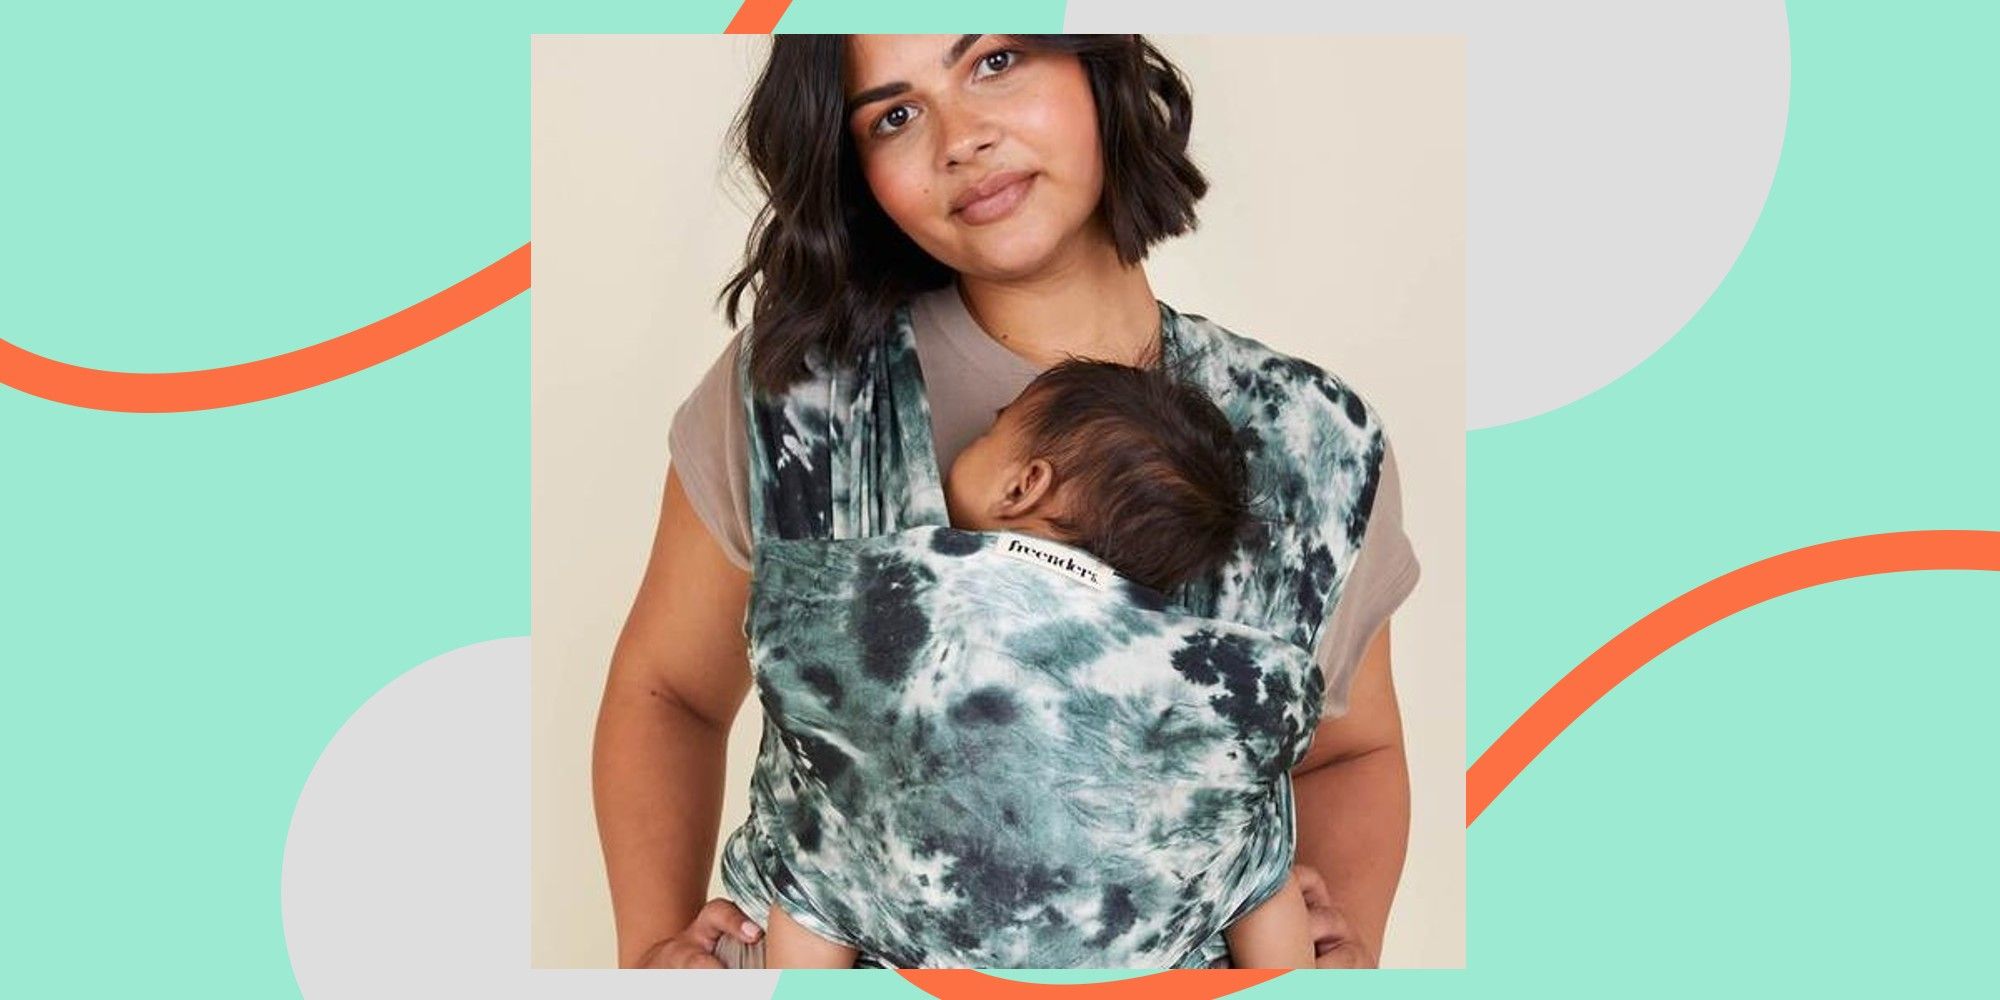 ultimate baby wrap carrier